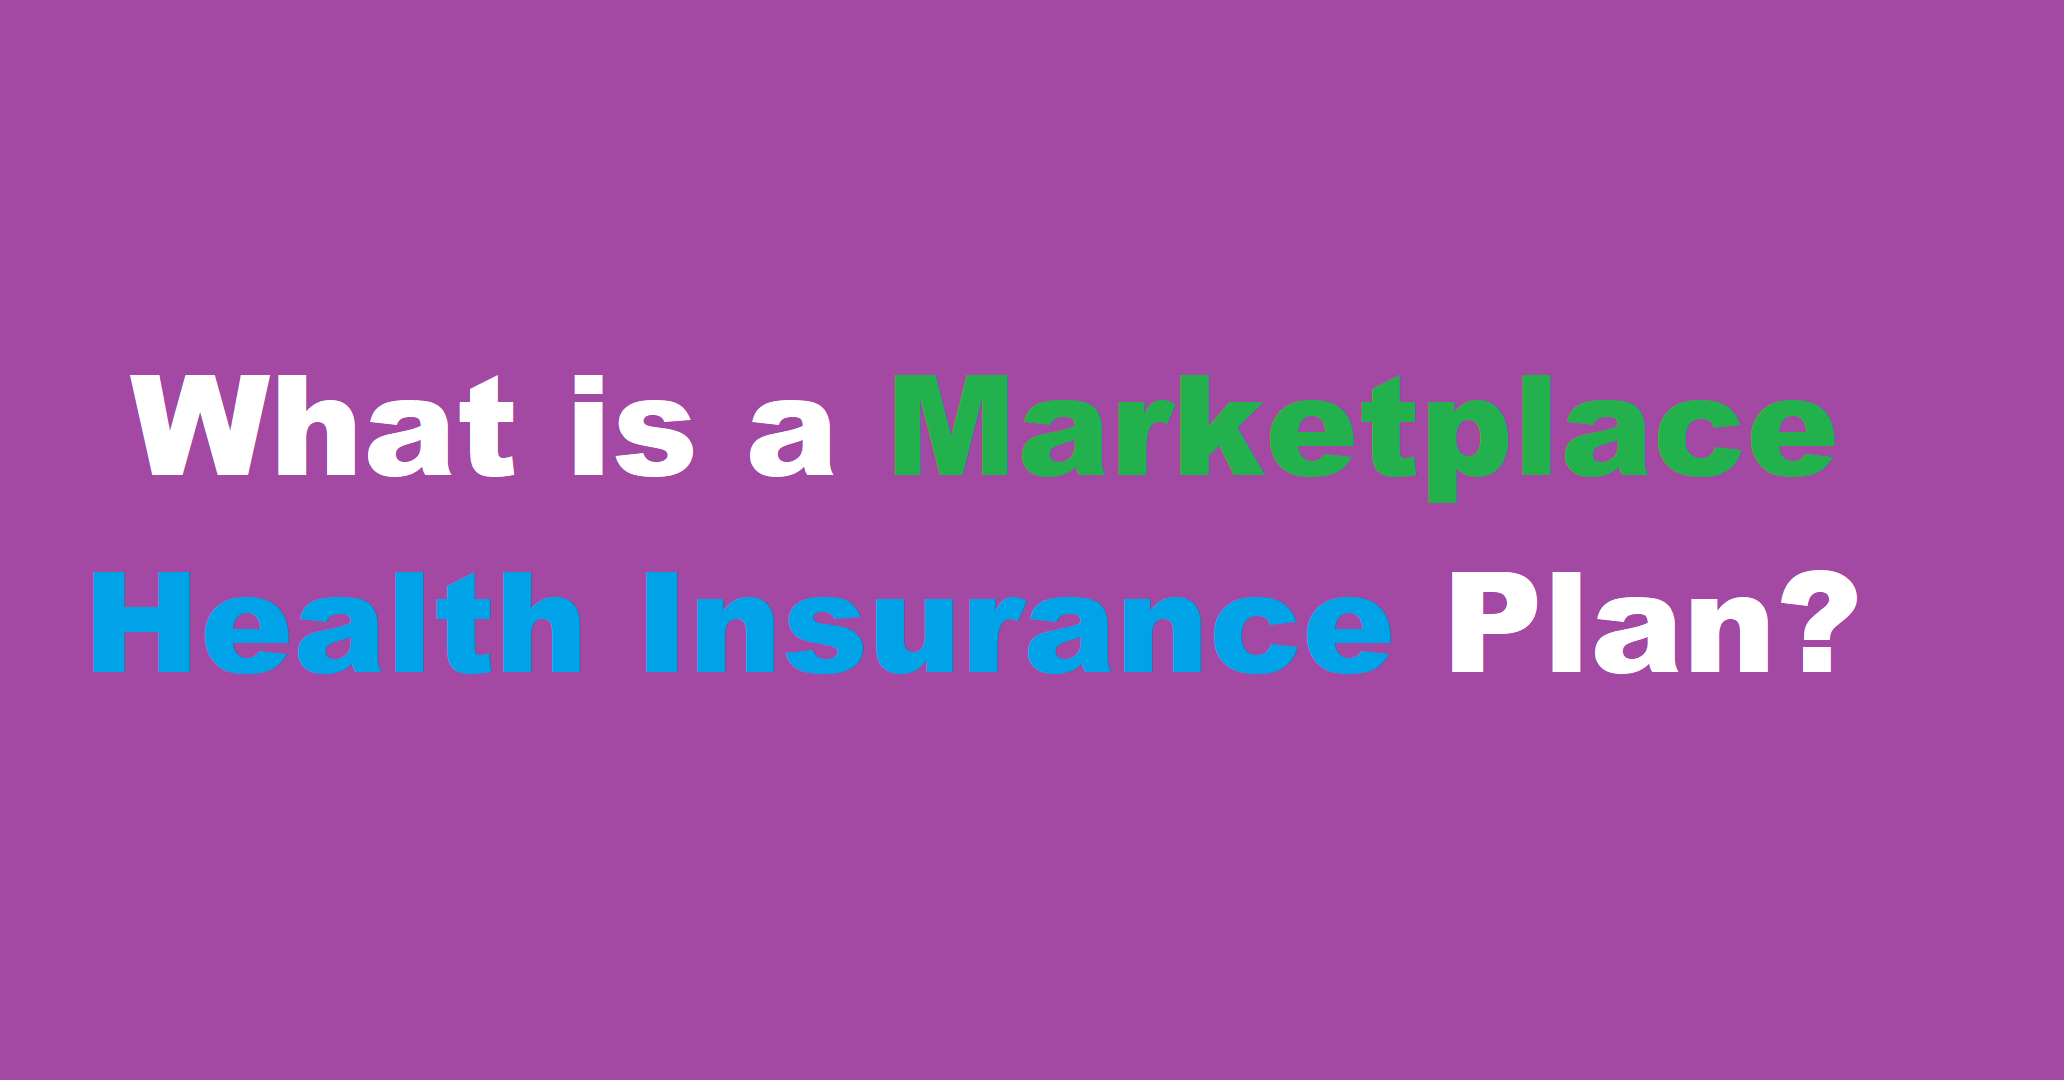 What is a Marketplace Health Insurance Plan?